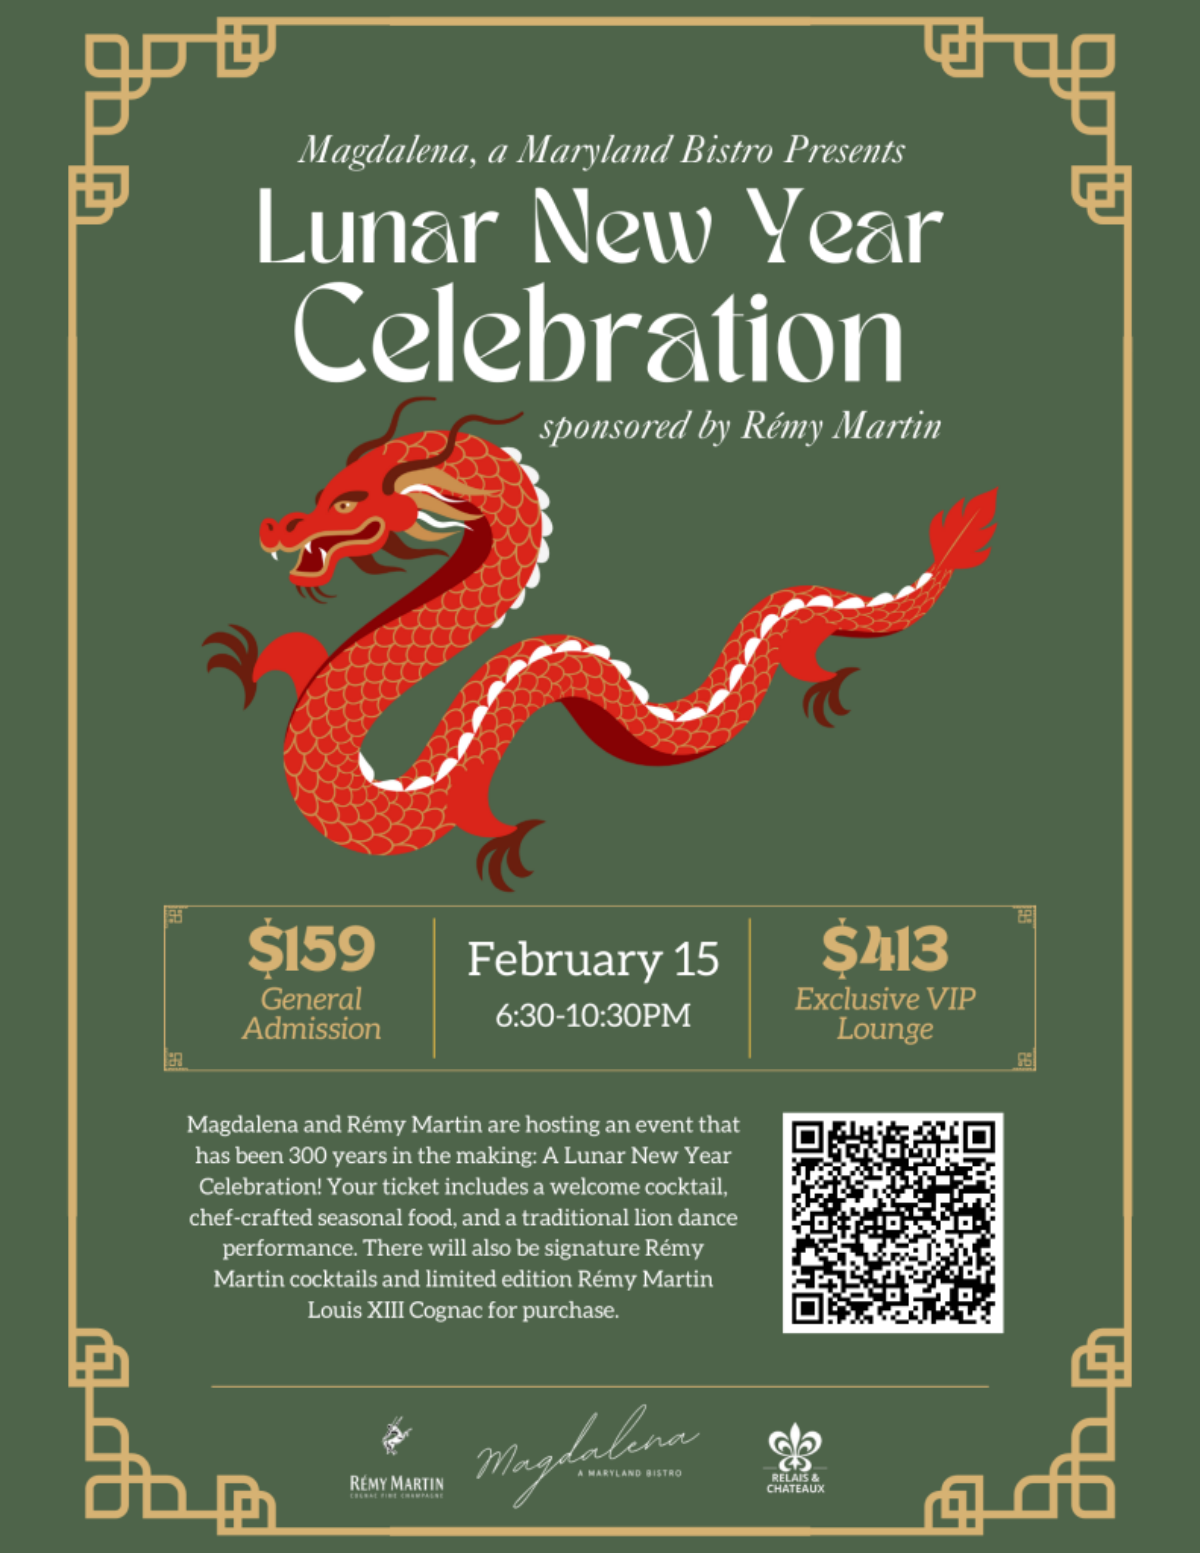 Lunar New Year Celebration at Magdalena with Remy Martin Flyer